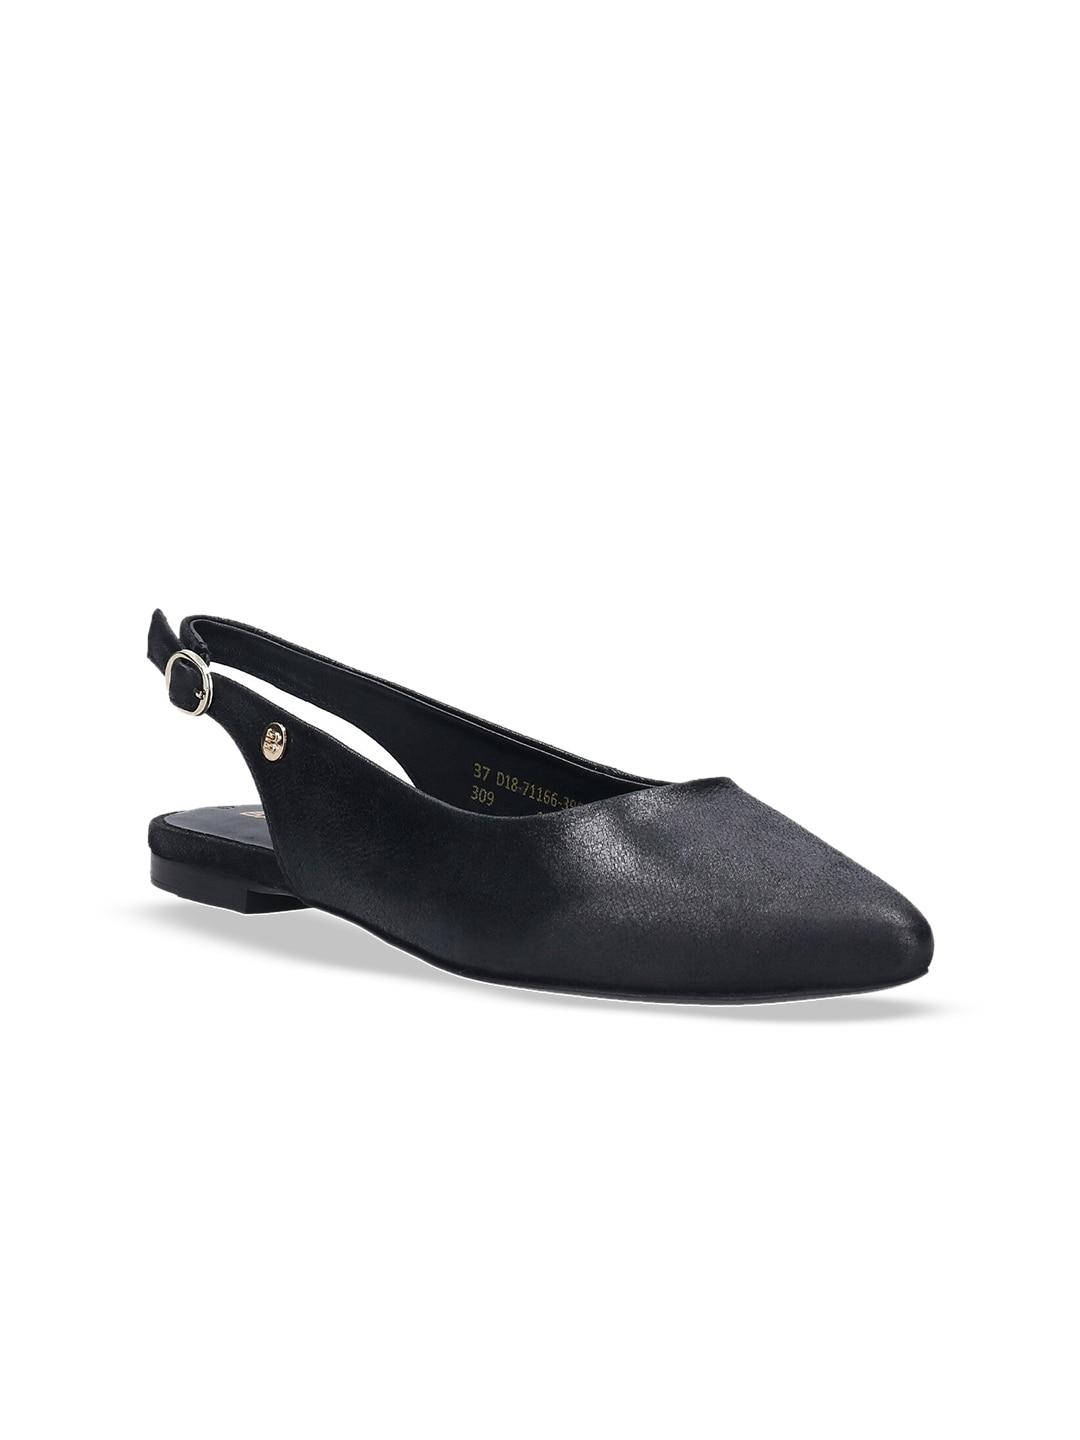 BAGATT Tabea Pointed Toe Leather Mules With Buckles Closure